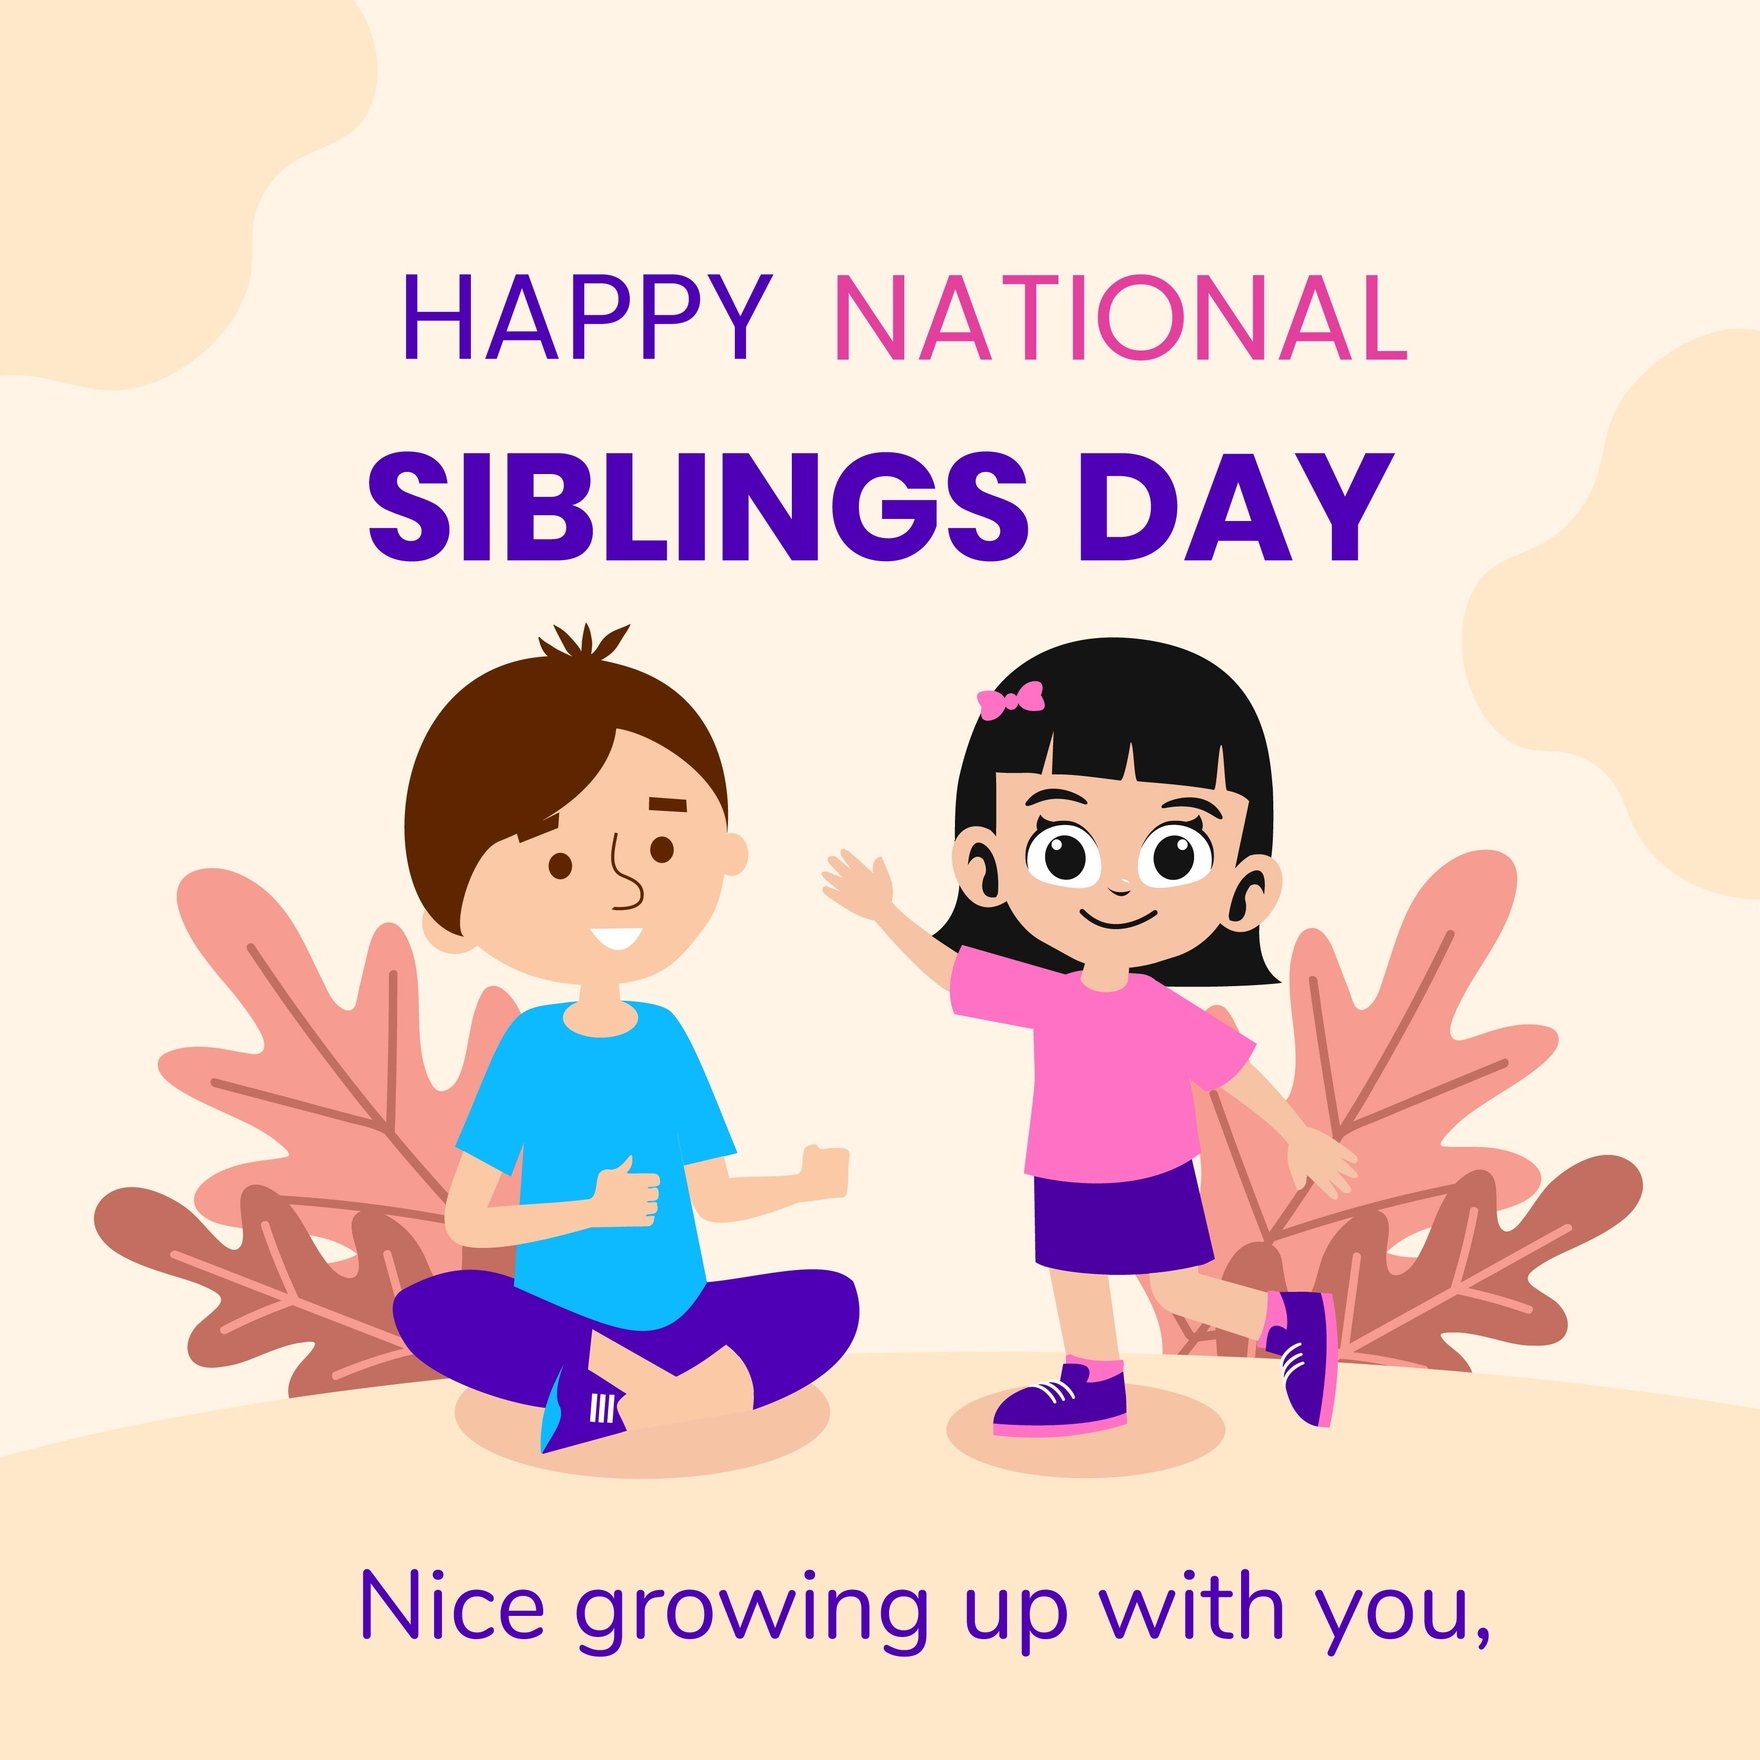 National Siblings Day WhatsApp Post in EPS, JPEG, PSD, Illustrator, PNG